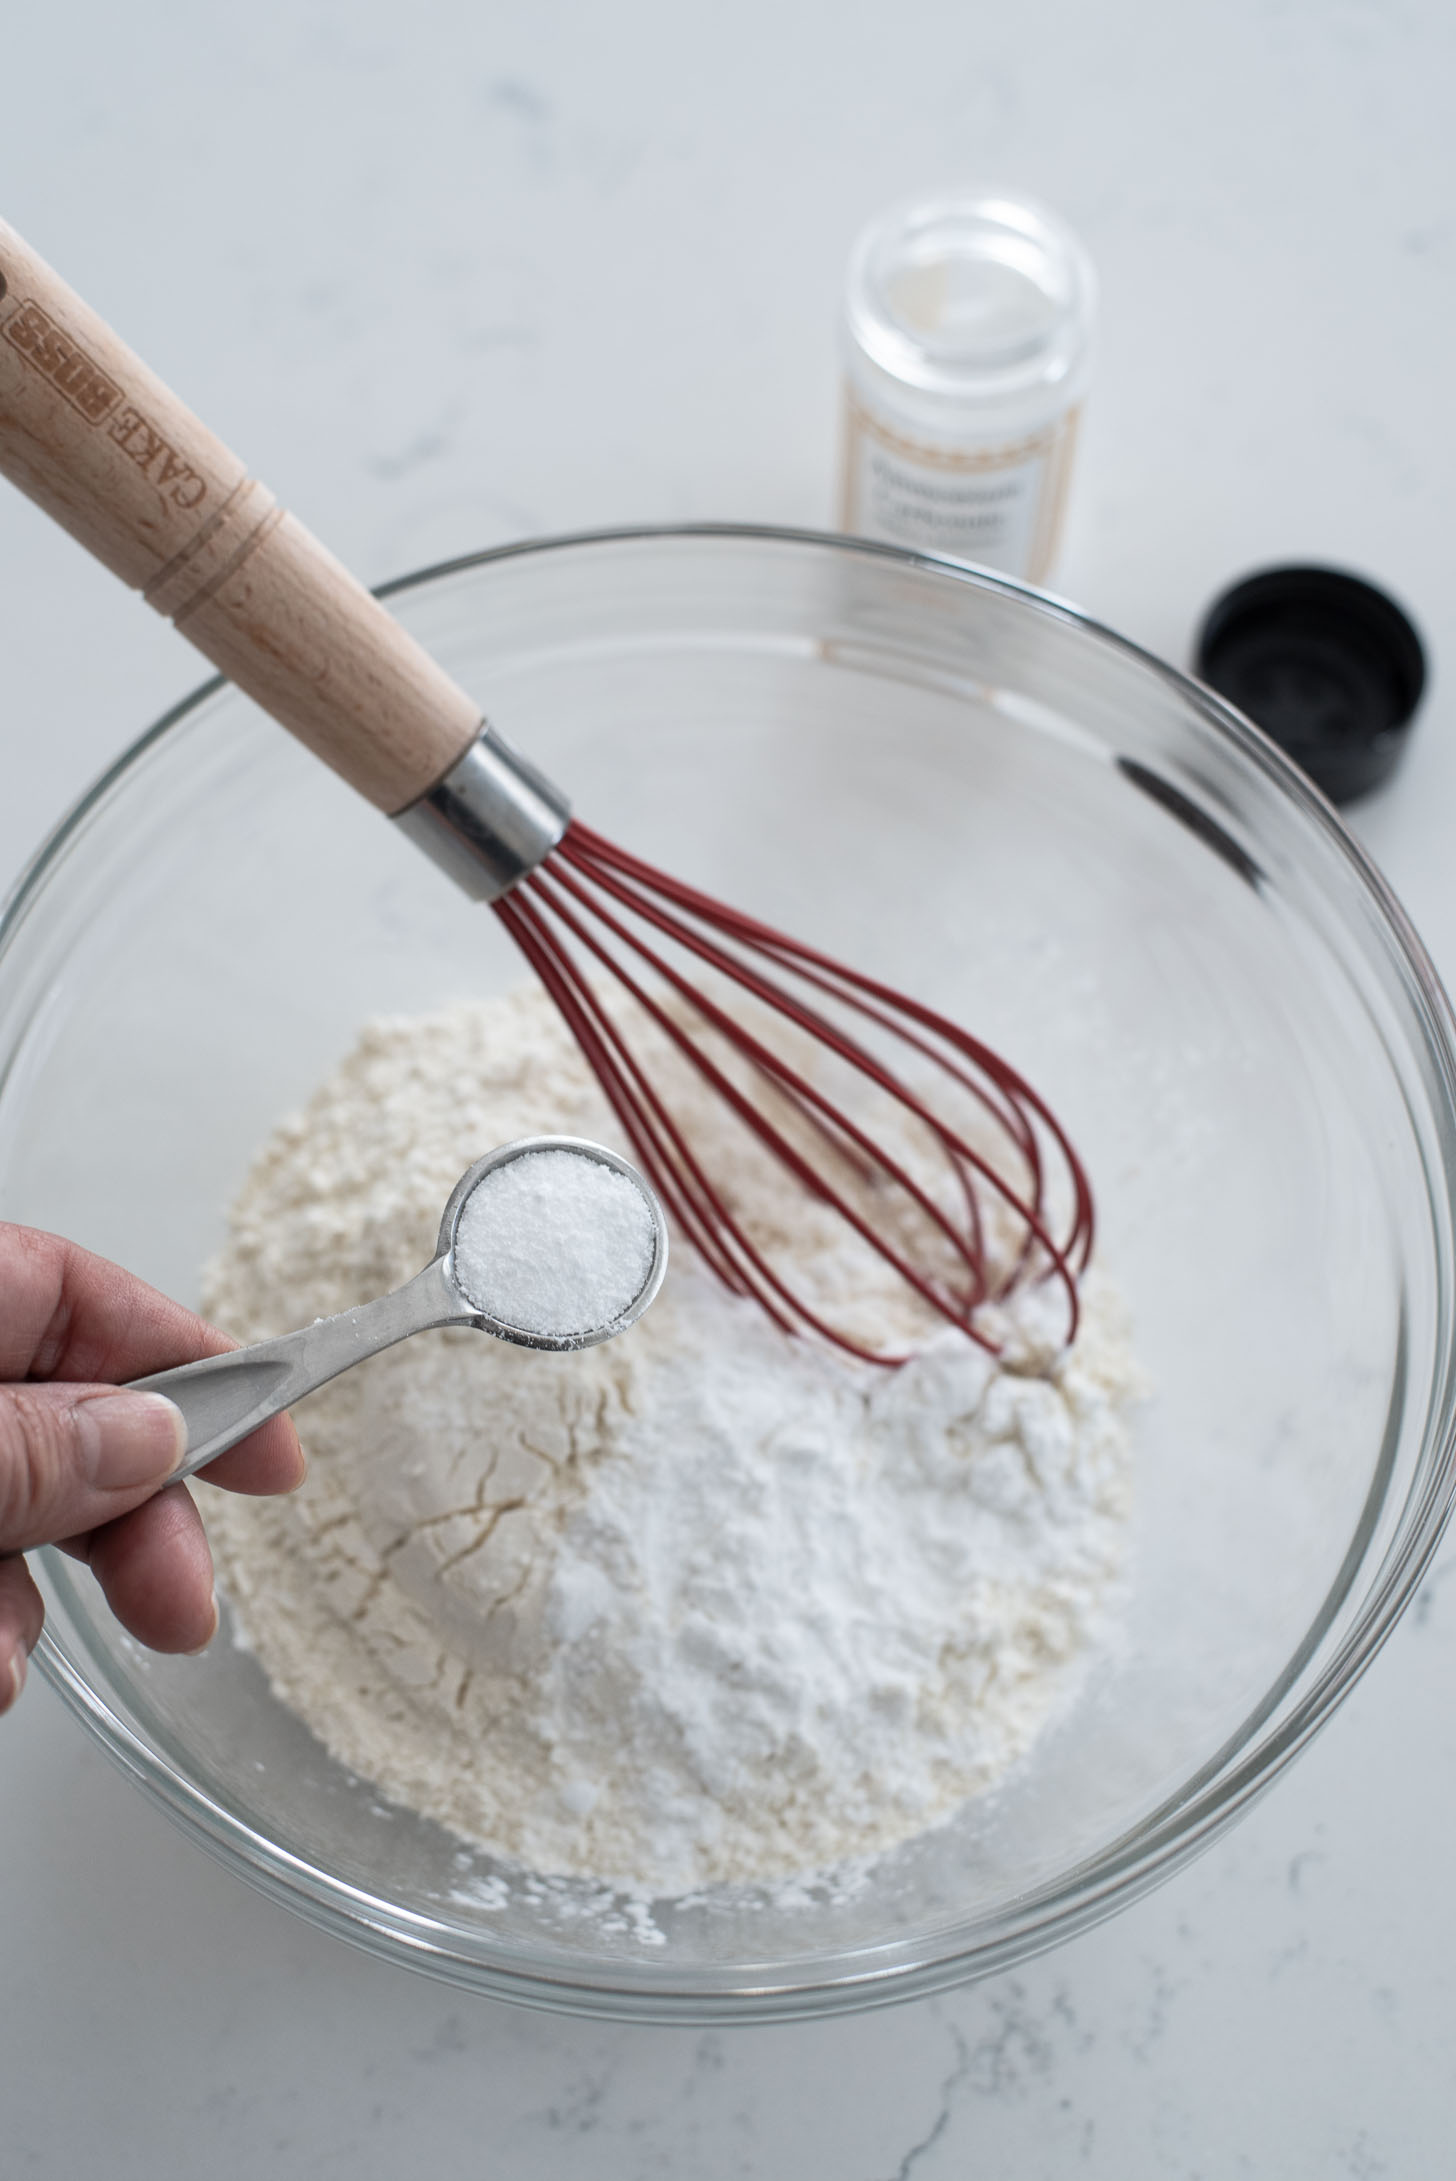 Dry ingredients for making Swedish dream cookies are combined in a bowl.